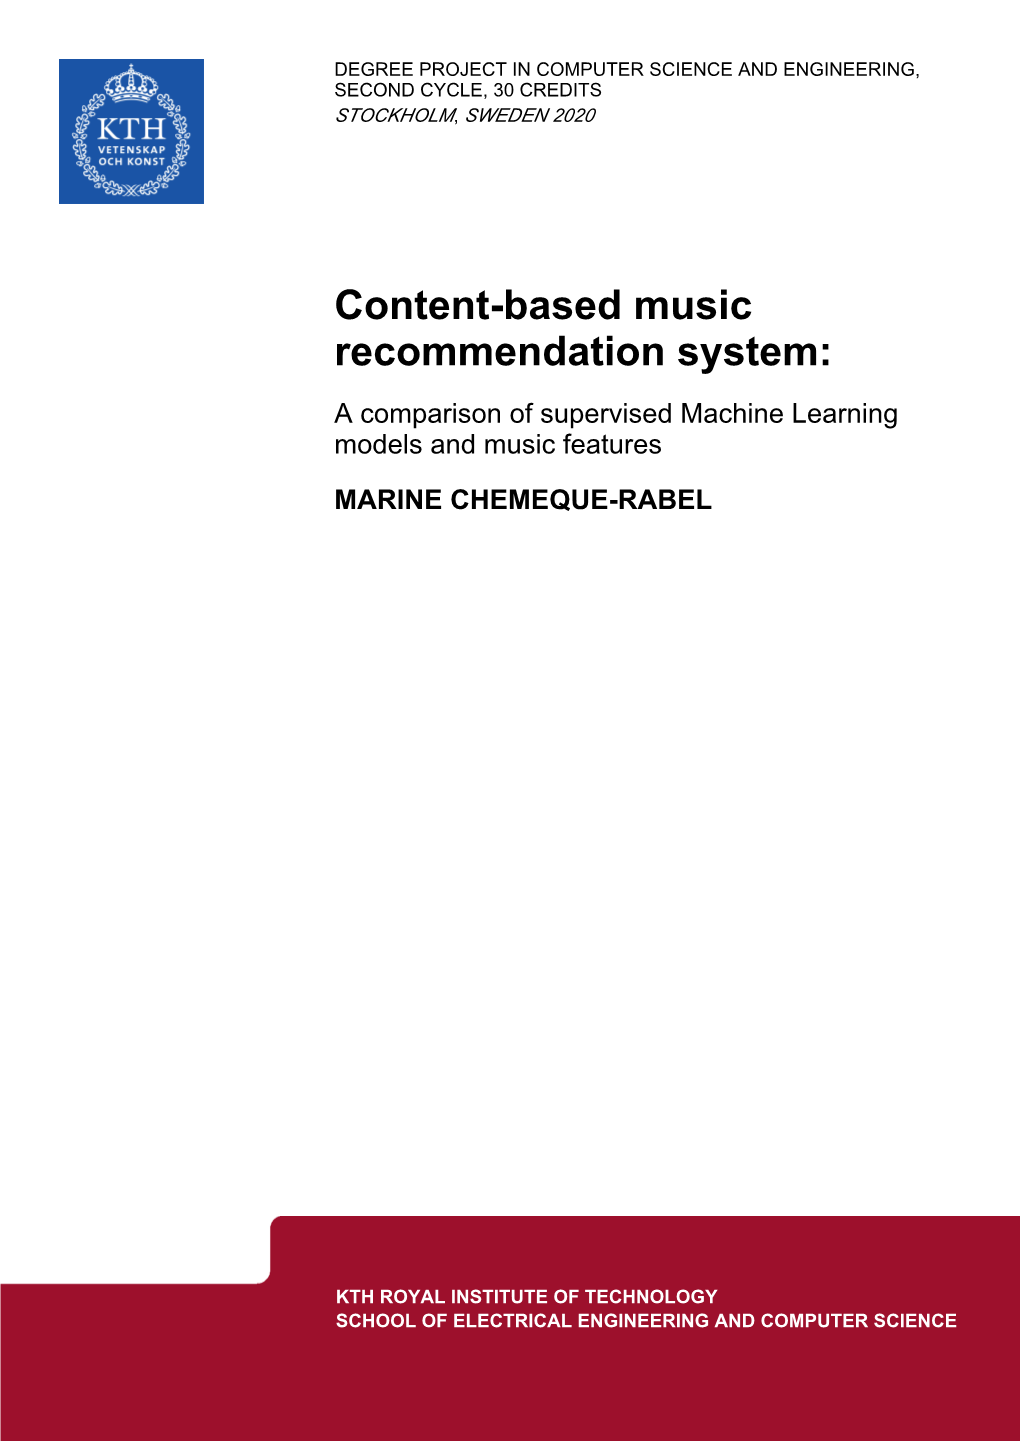 Content-Based Music Recommendation System: a Comparison of Supervised Machine Learning Models and Music Features